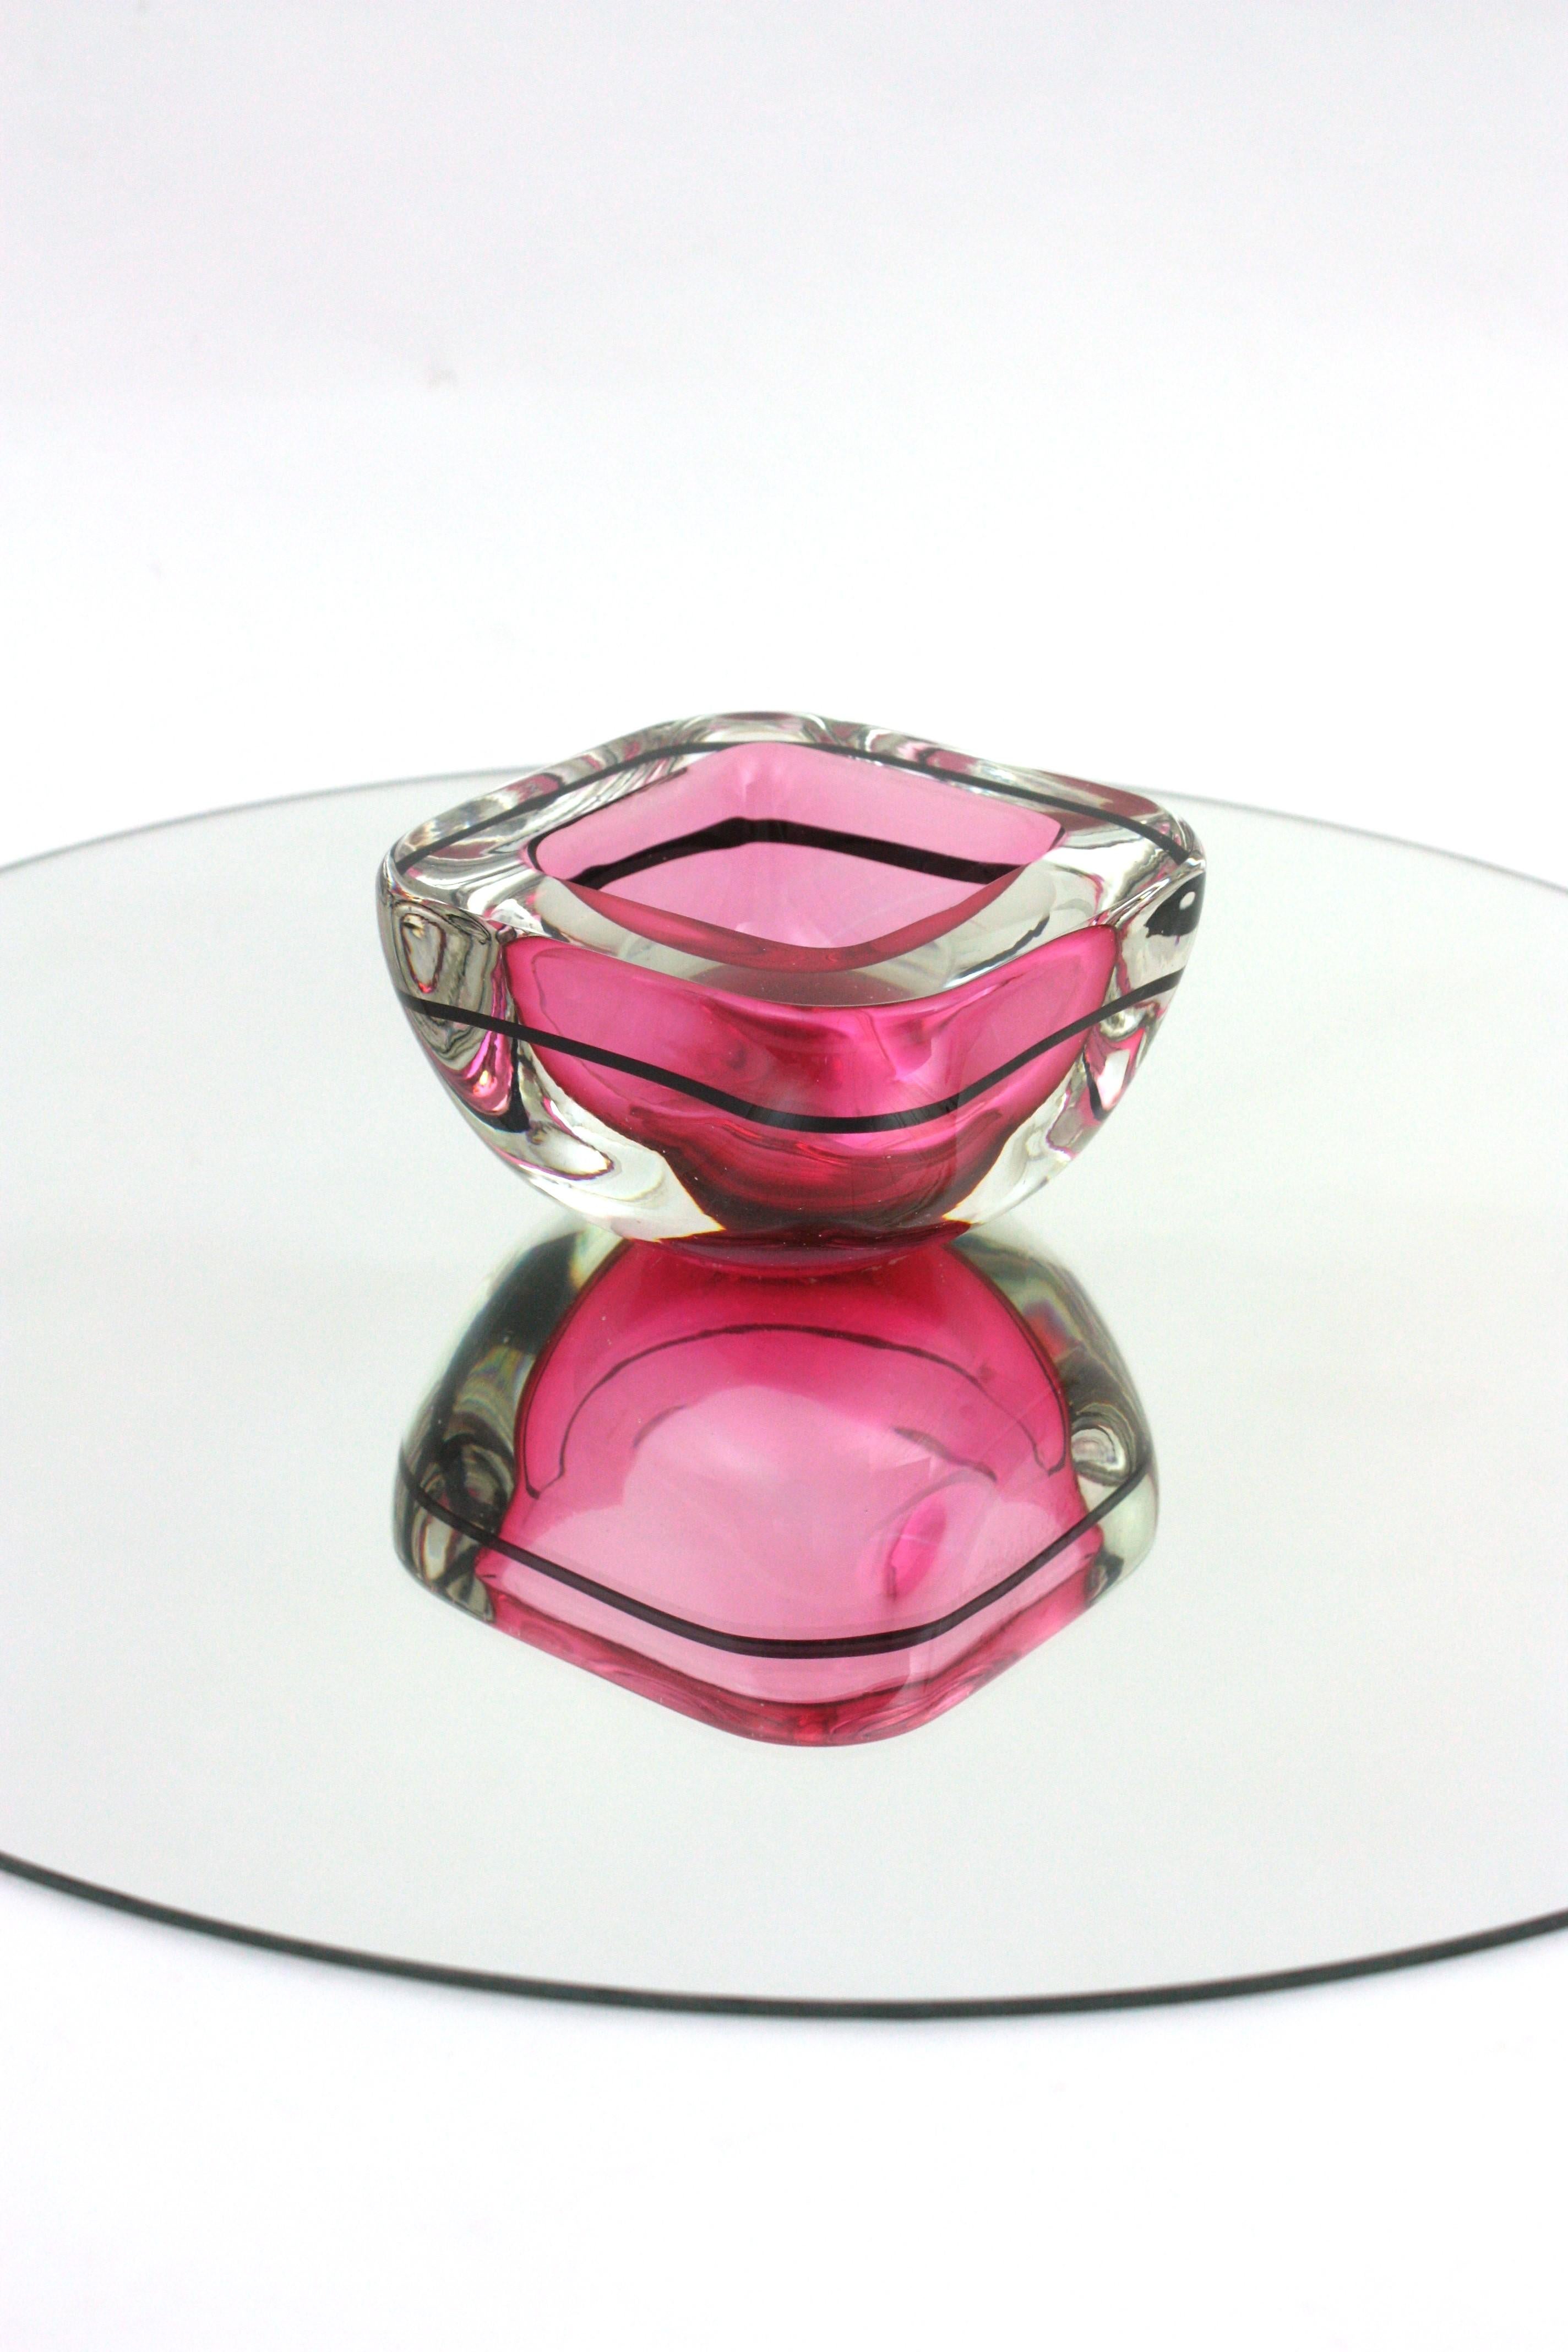 Archimede Seguso Murano Sommerso Pink Black Geode Art Glass Bowl For Sale 2